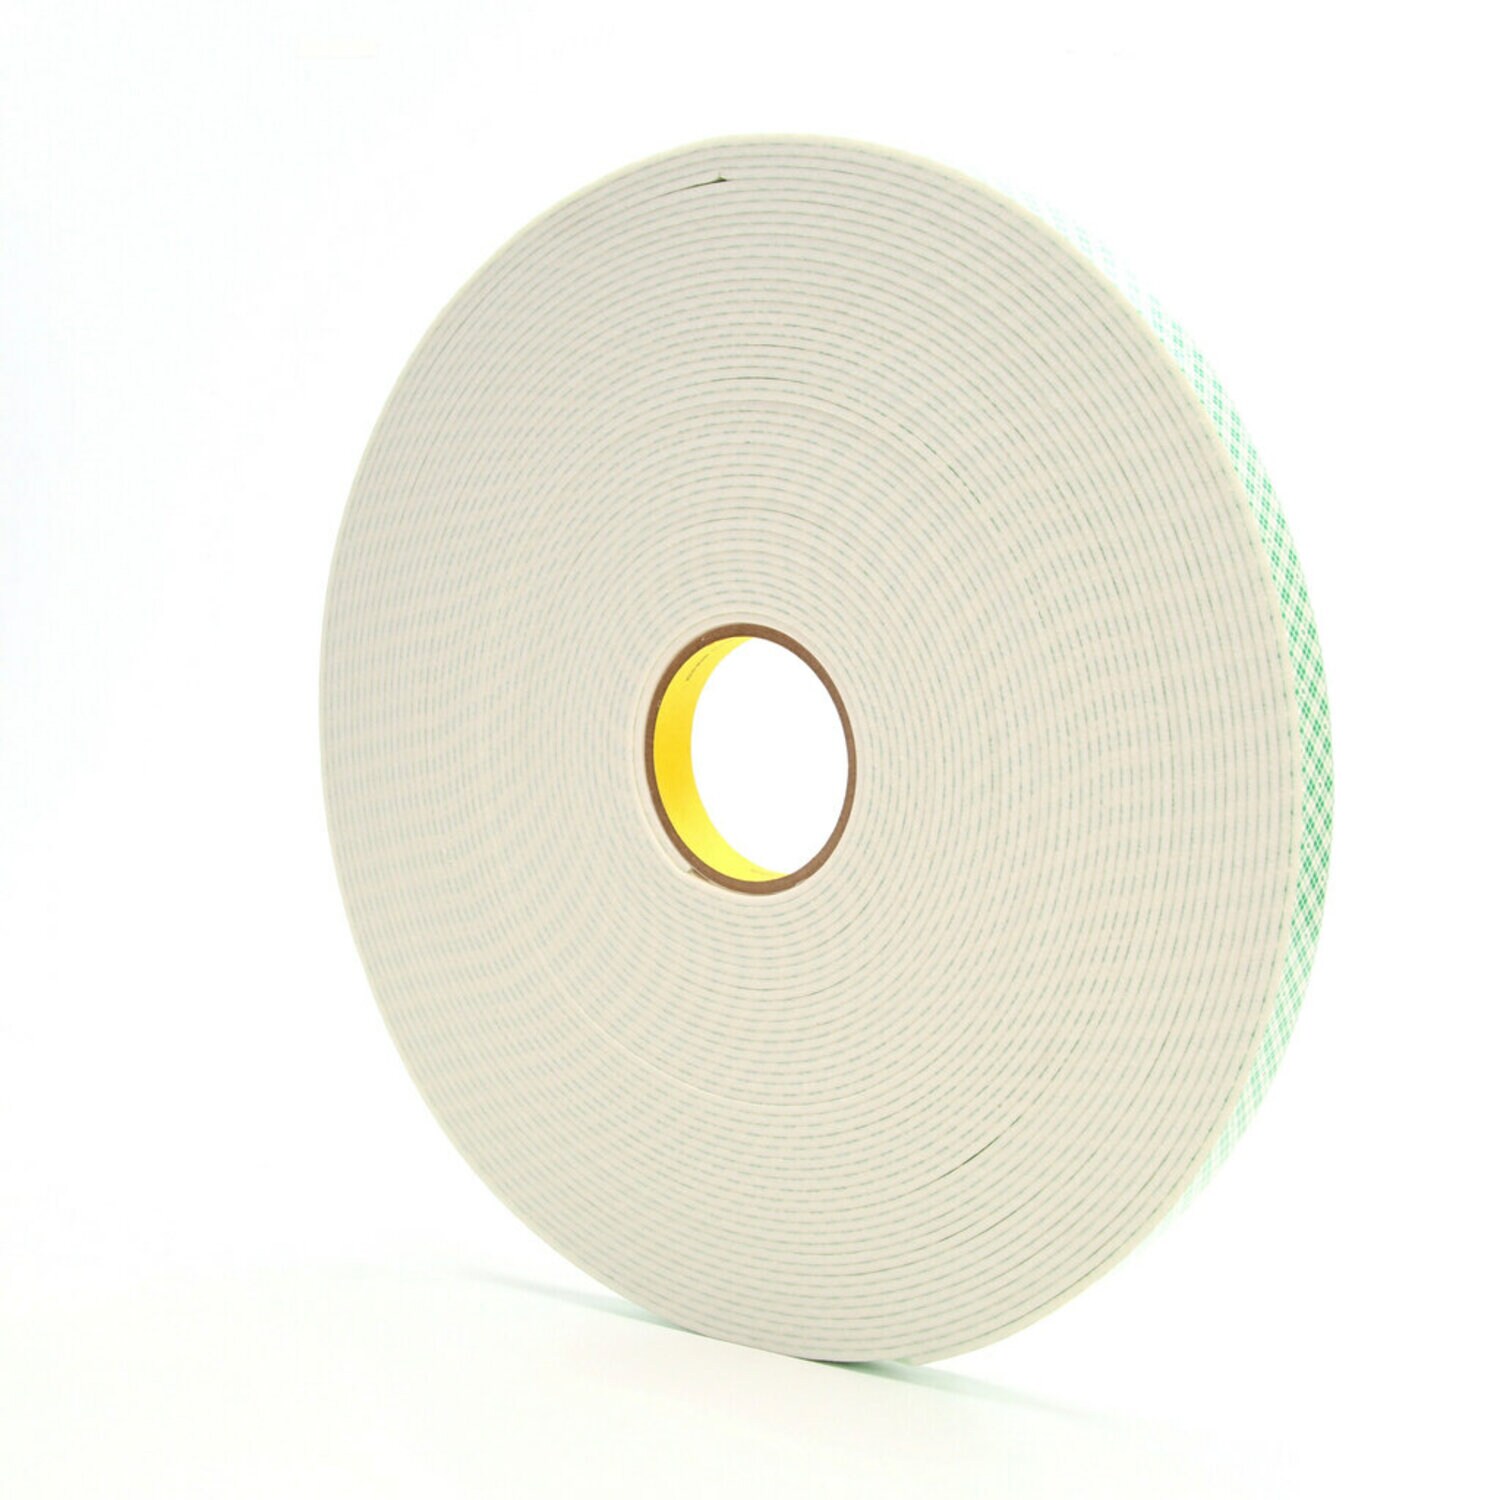 7100012521 - 3M Urethane Foam Tape 4104, Natural, 250 mil, Roll, Config